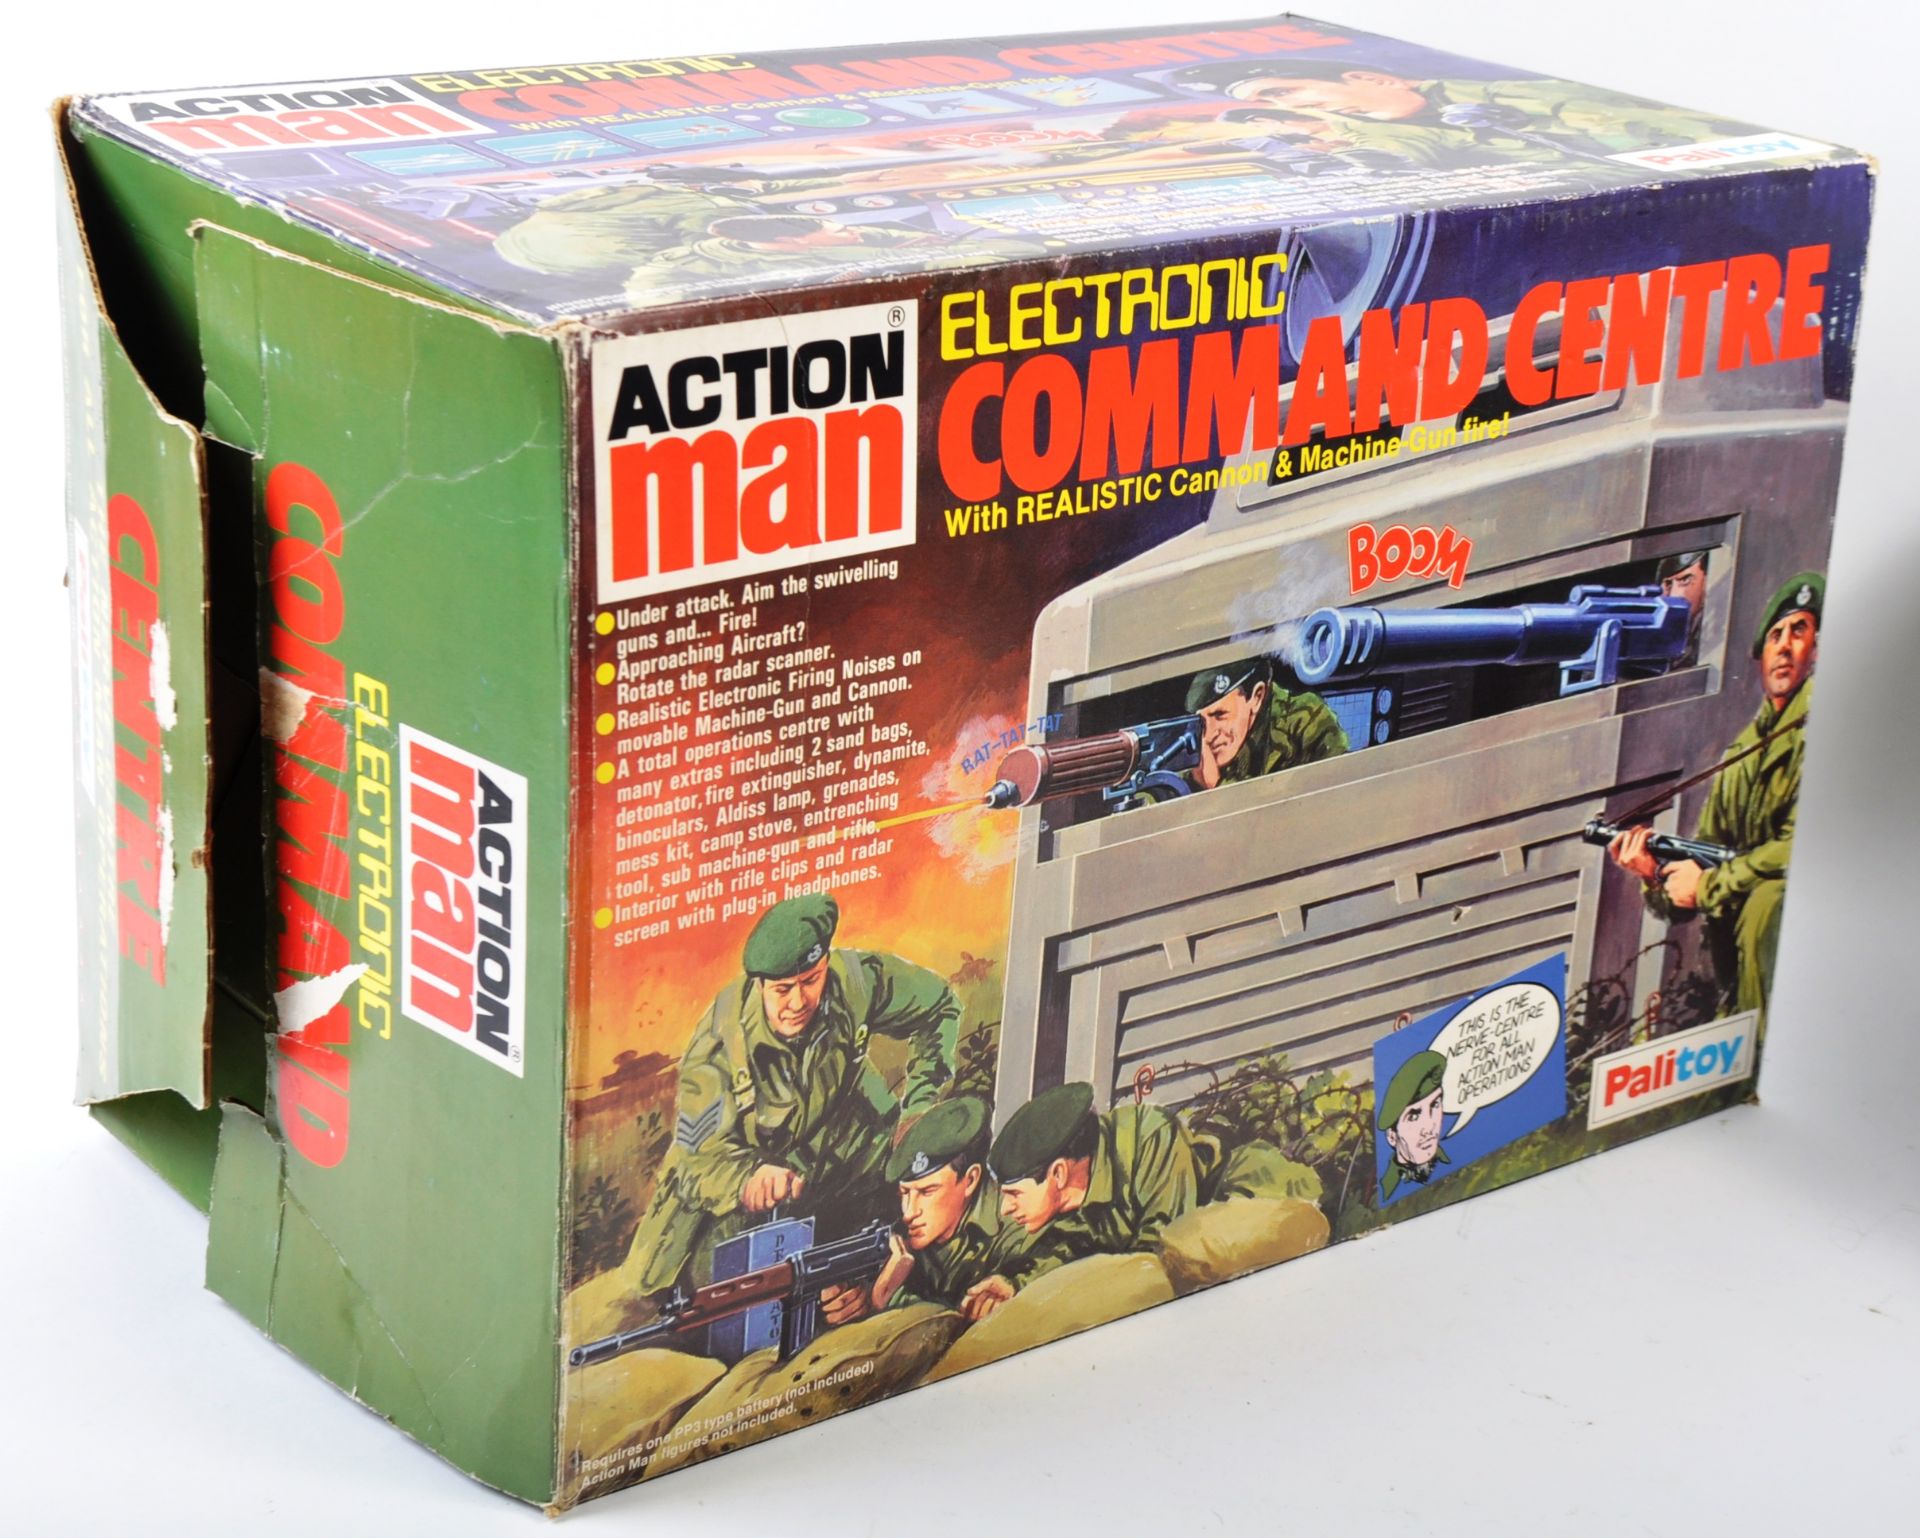 RARE PALITOY ACTION MAN ELECTRONIC COMMAND CENTRE PLAYSET - Image 9 of 10